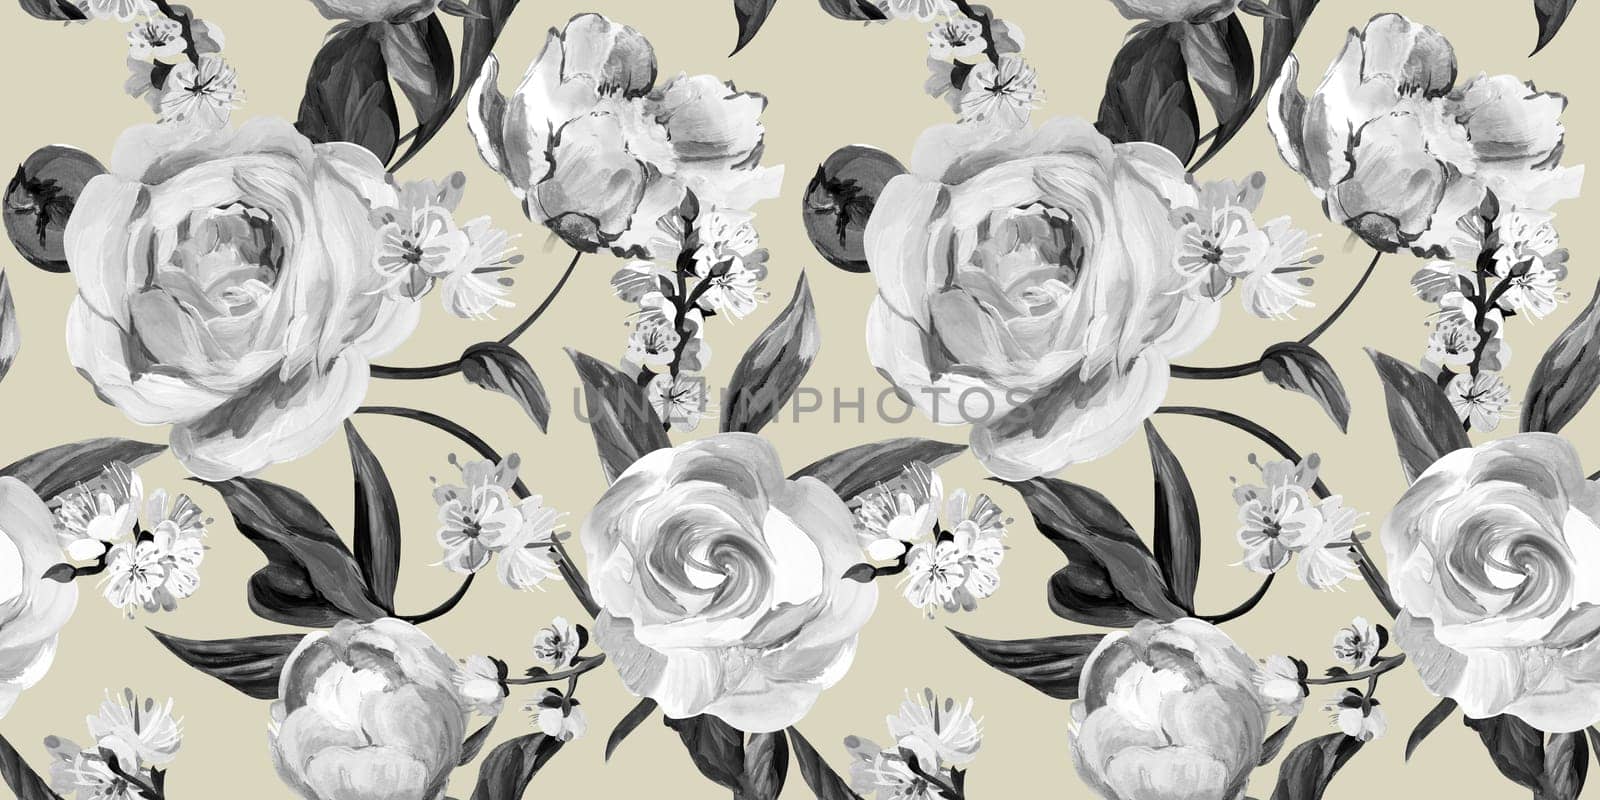 Botanical seamless pattern with peonies and sakura branches drawn in gouache for textile and design